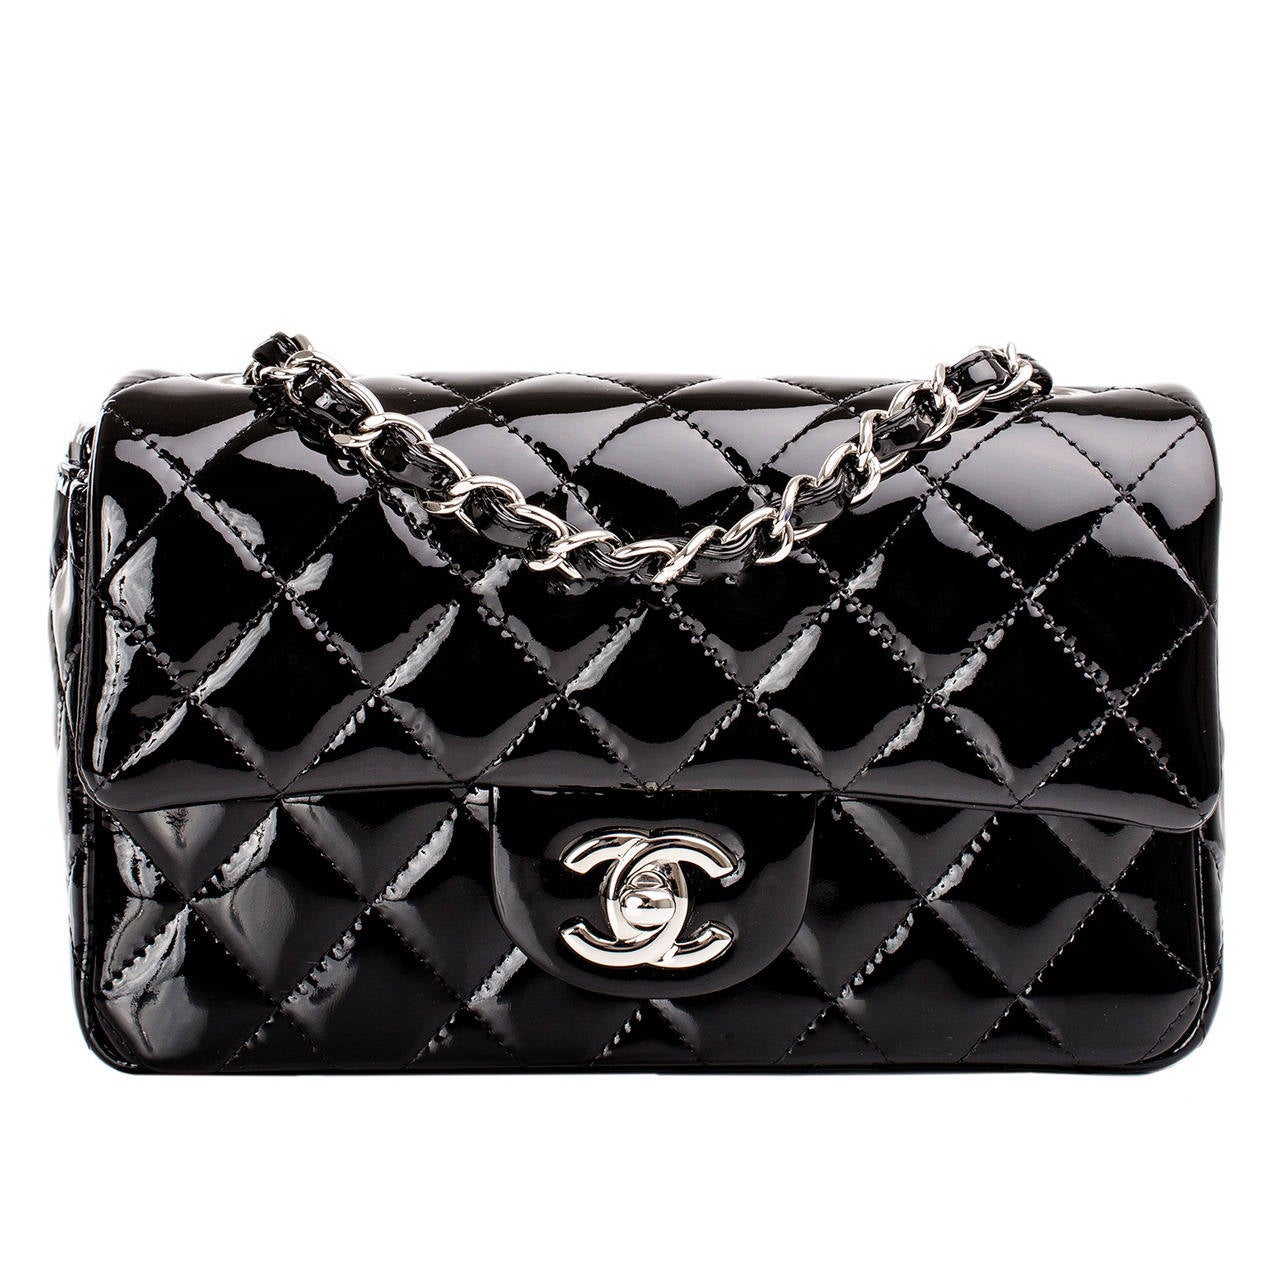 Chanel Black Quilted Patent Small Classic Flap Bag at 1stdibs